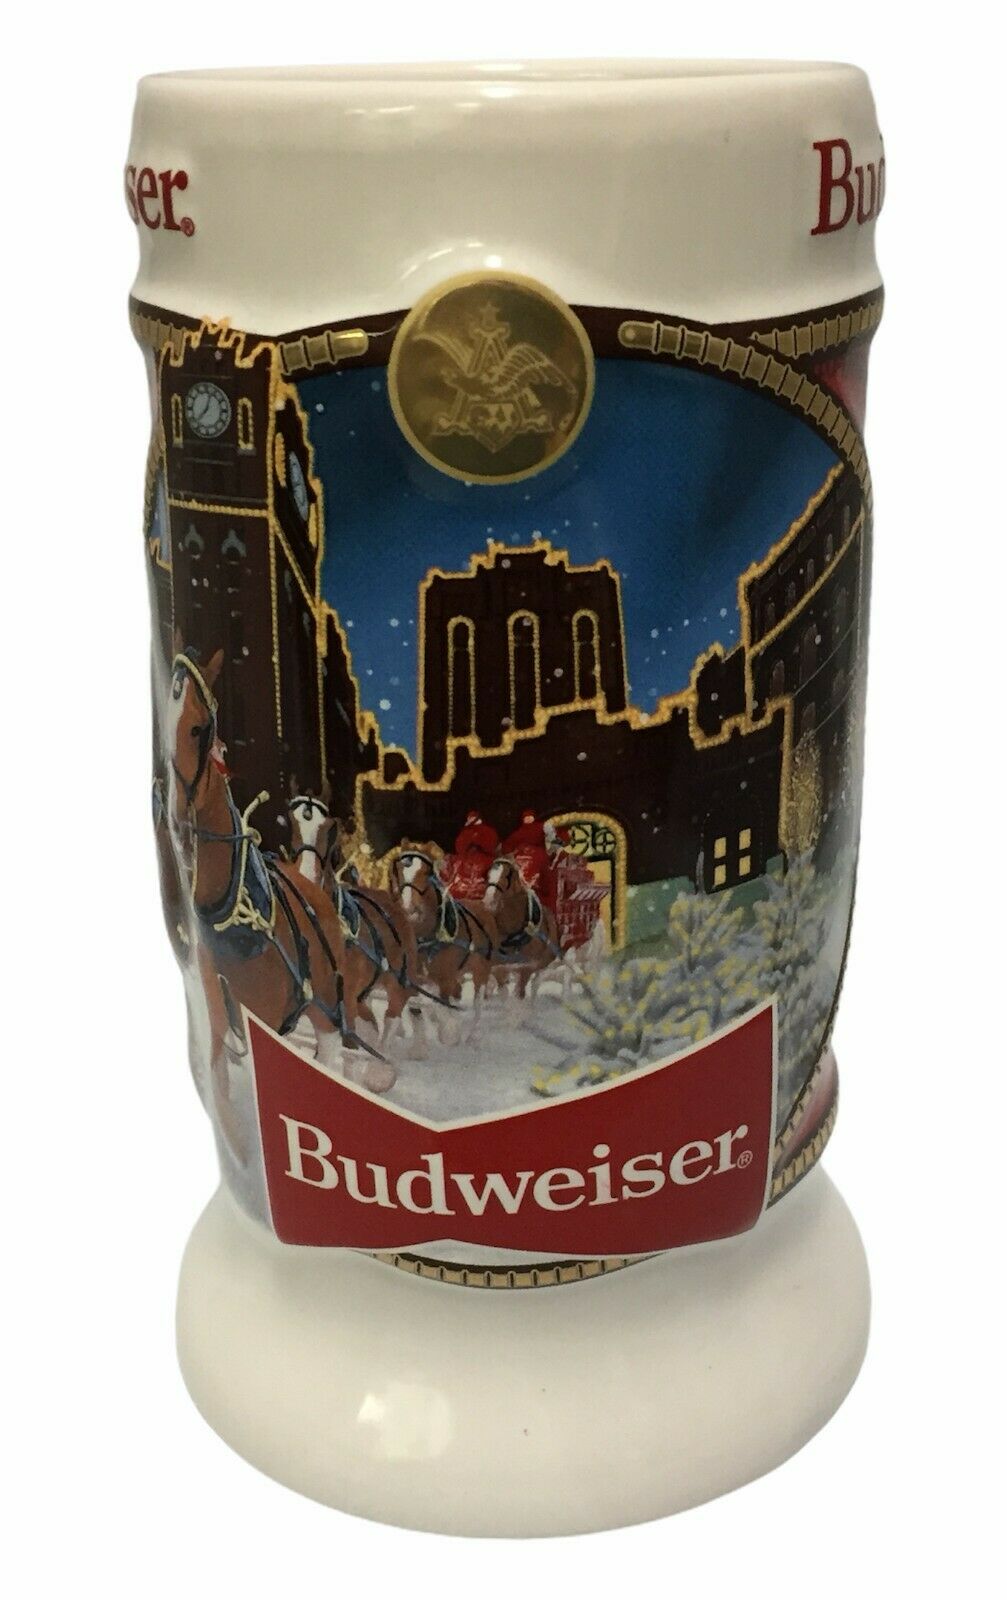 2020 Budweiser Holiday Stein From Annual Christmas Series Latest New Beer Mug!!